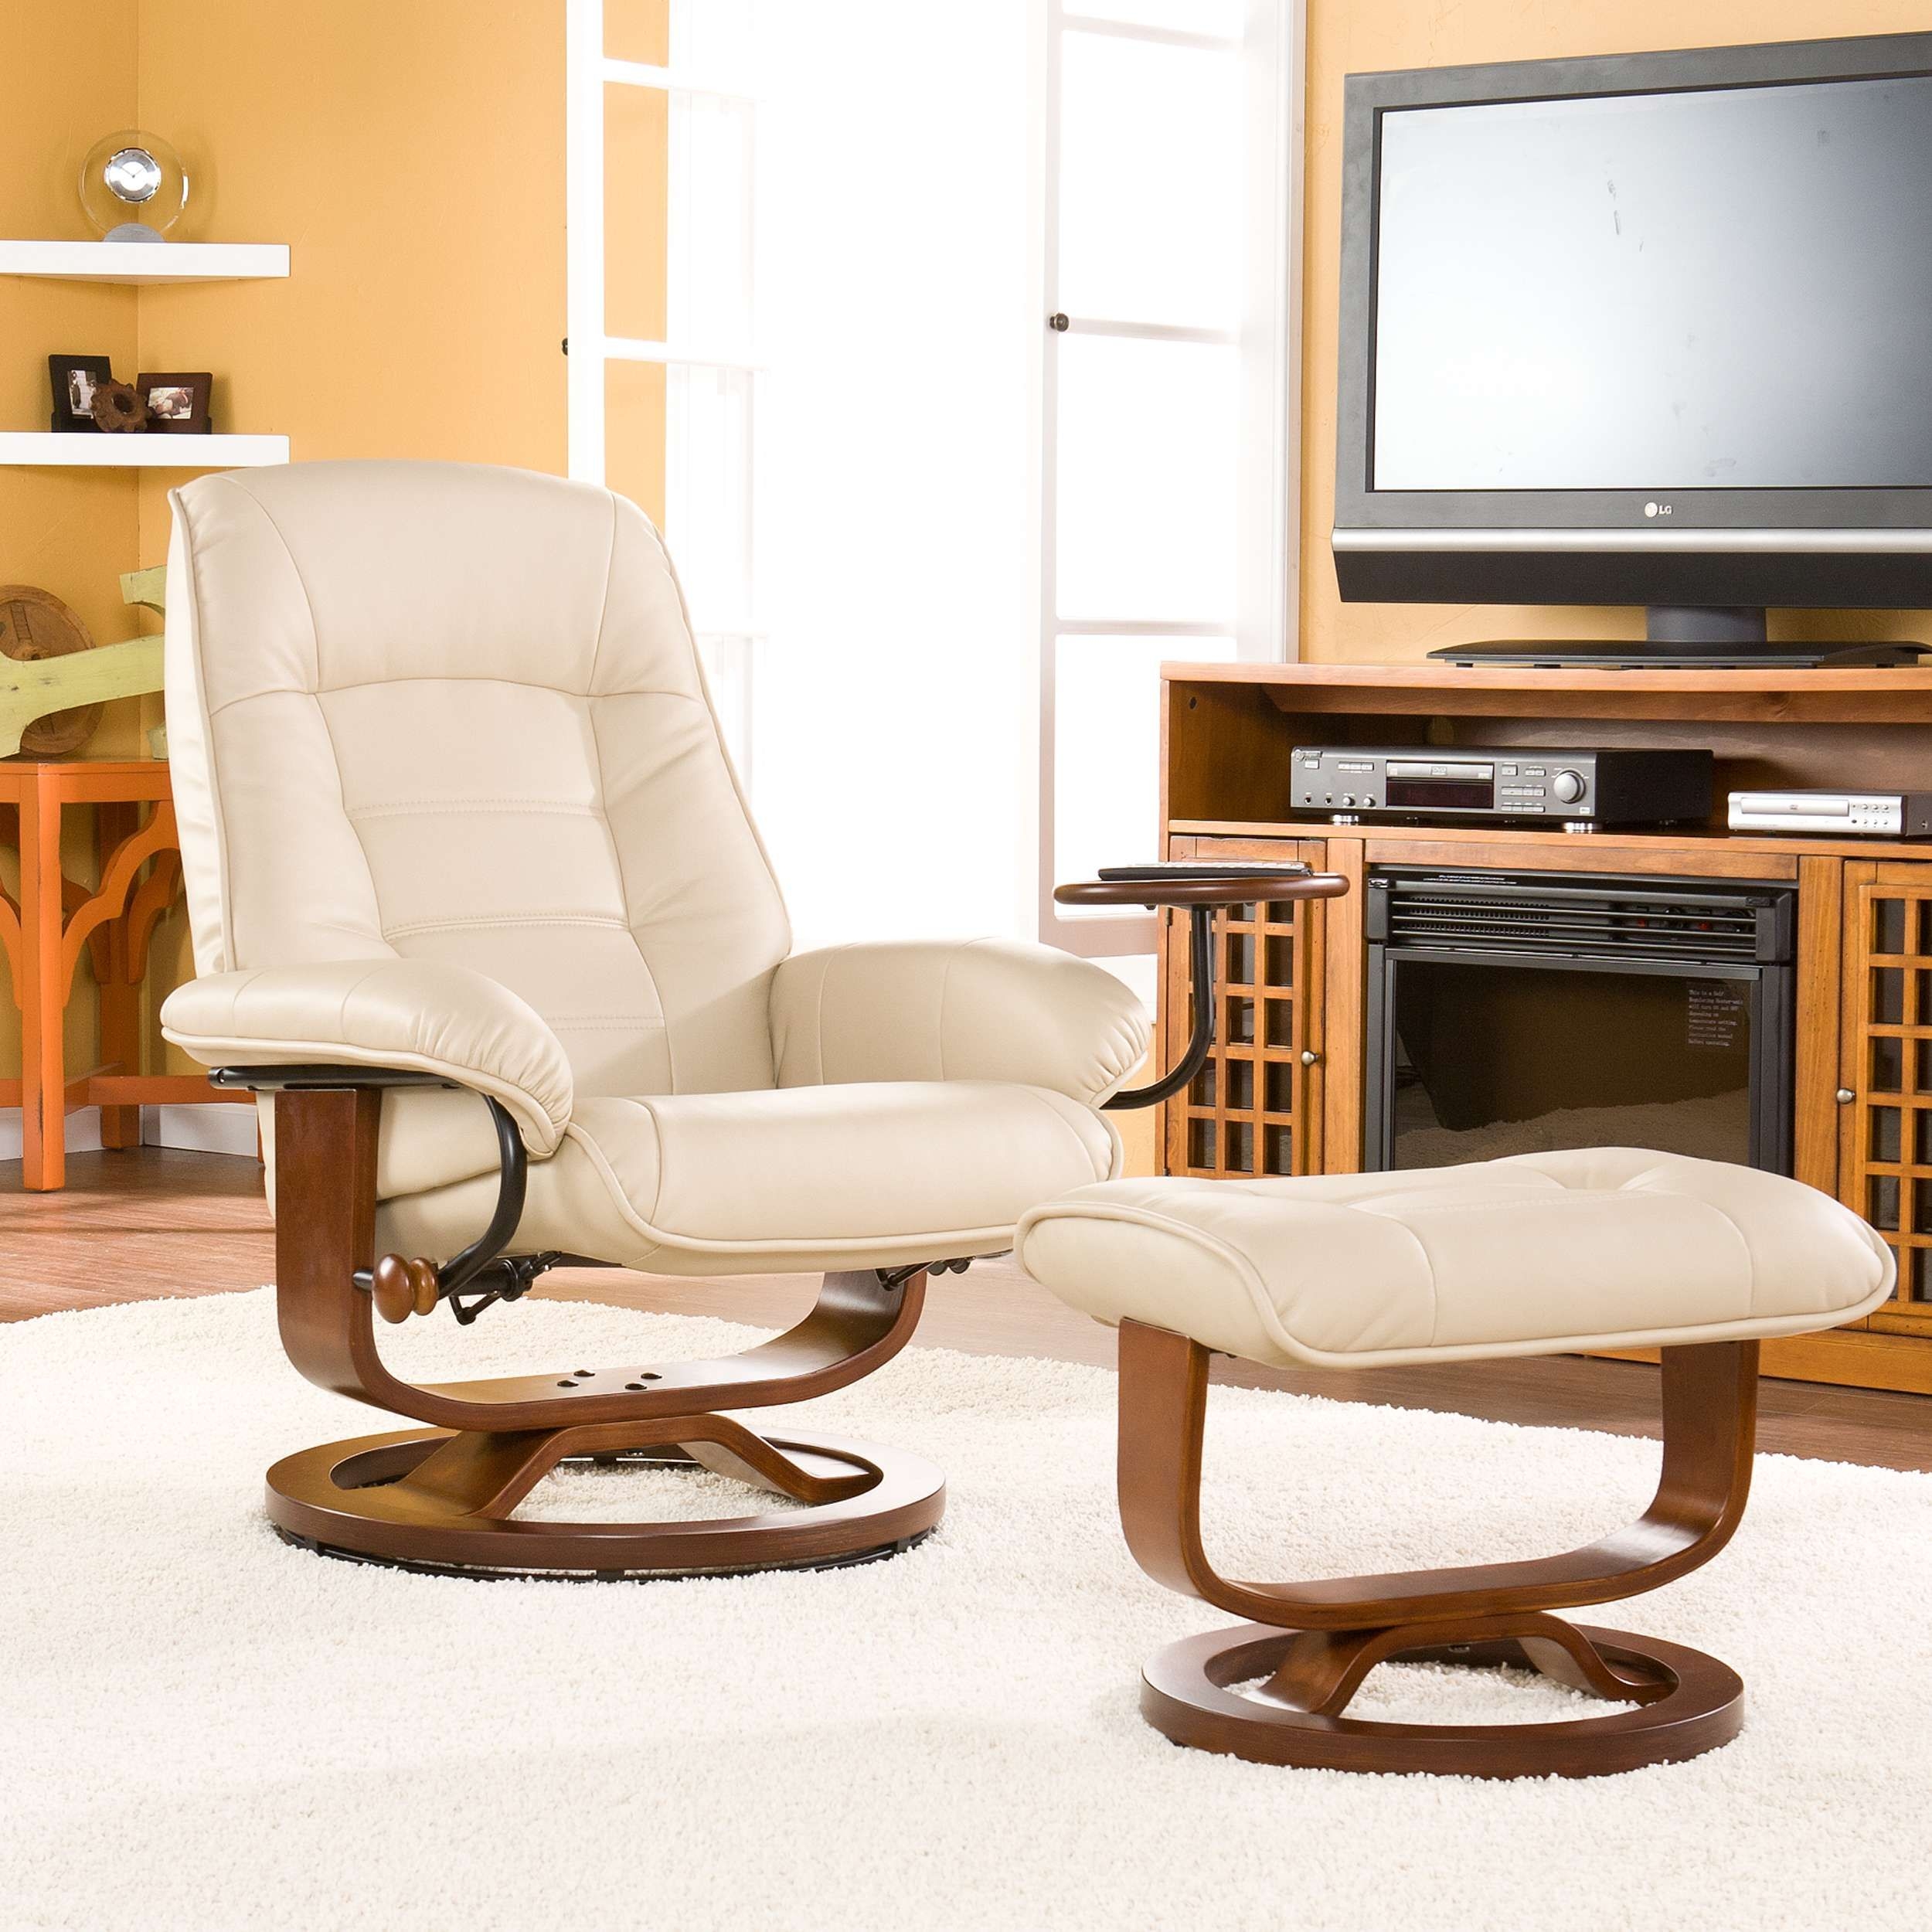 Reclining leather chair with ottoman